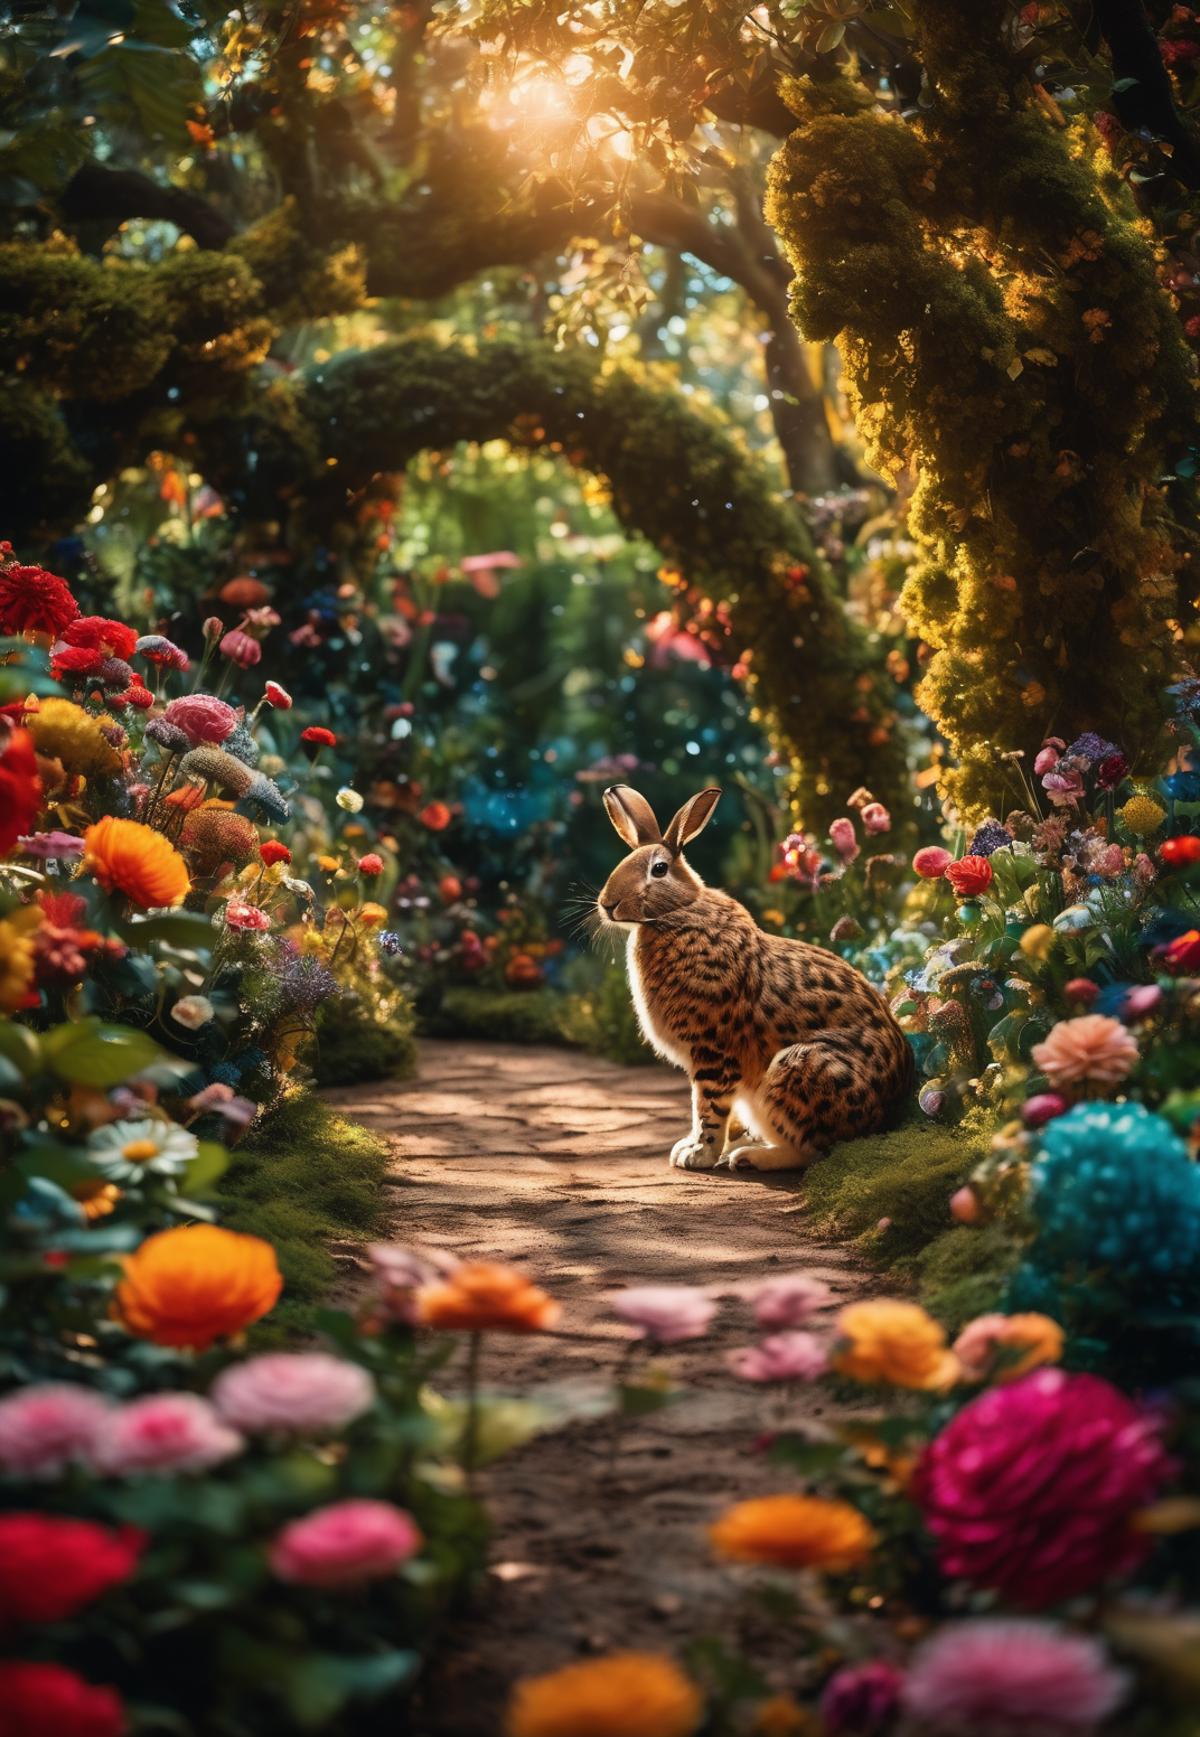 A rabbit sitting on a path surrounded by flowers and plants.